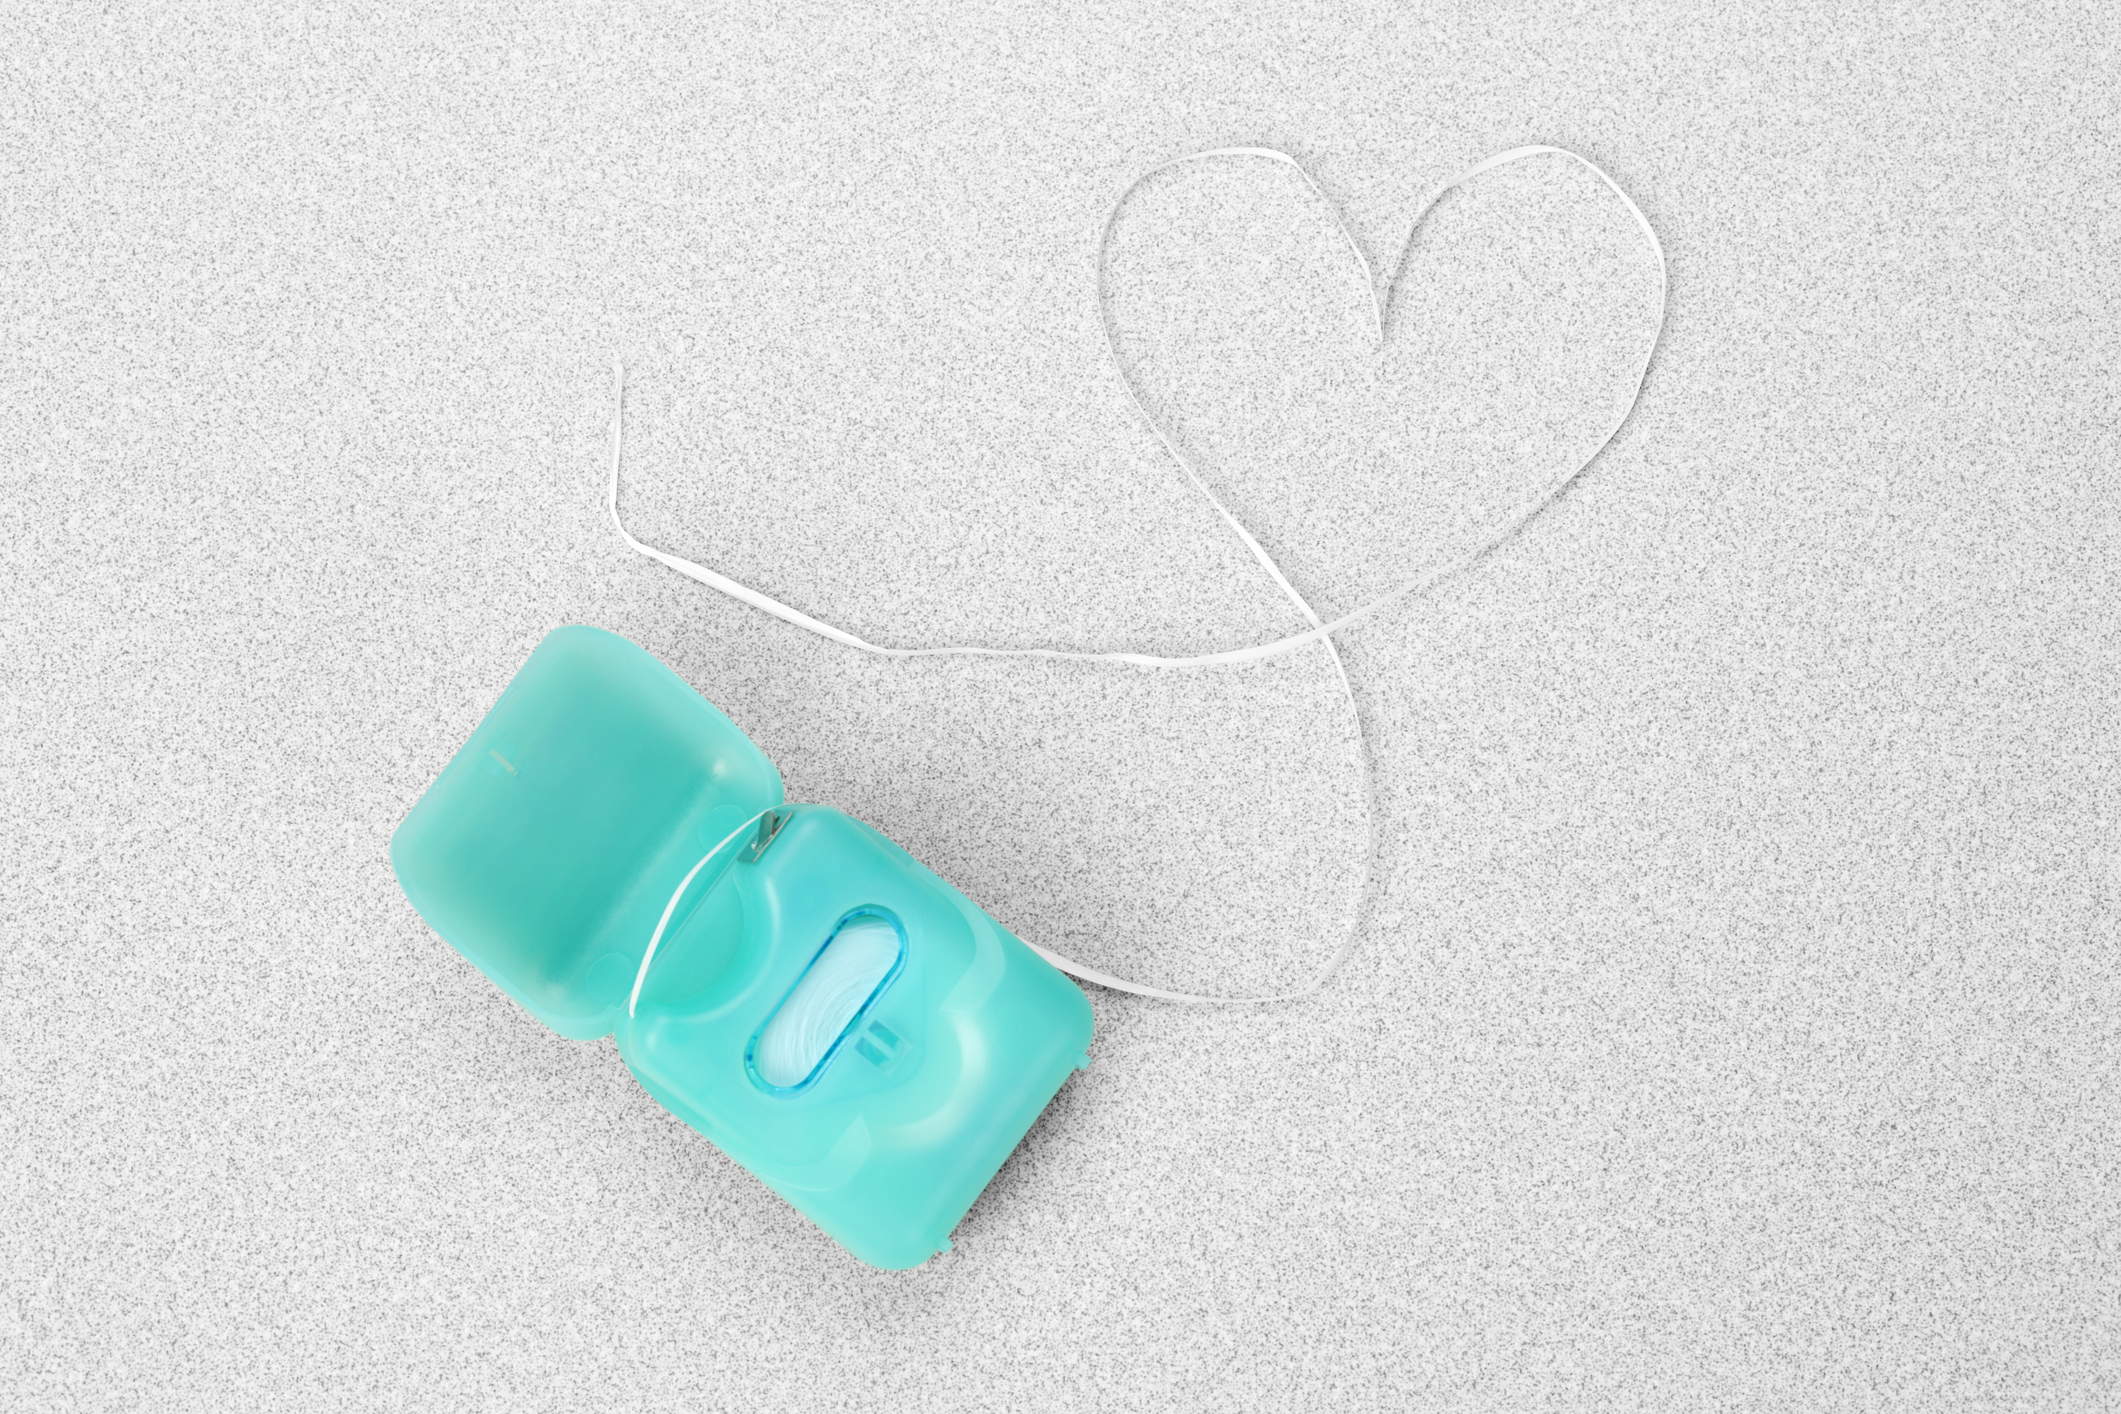 Another reason to floss: Atrial fibrillation